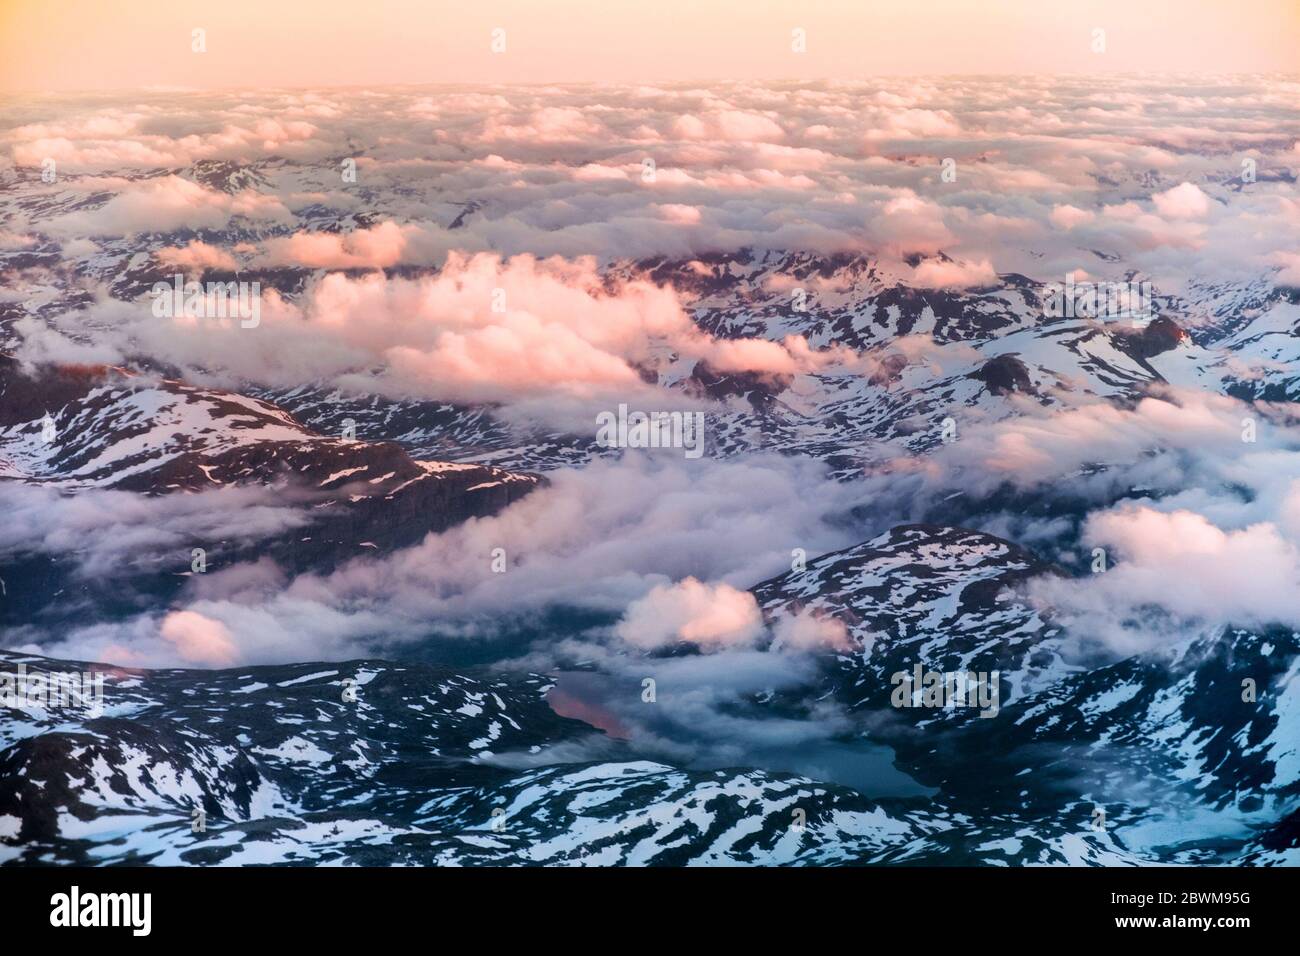 Norway. Aerial view of snowy landscape in winter with mountains and lakes in Norway at sunset. Norwegian fjords in summer from above Stock Photo